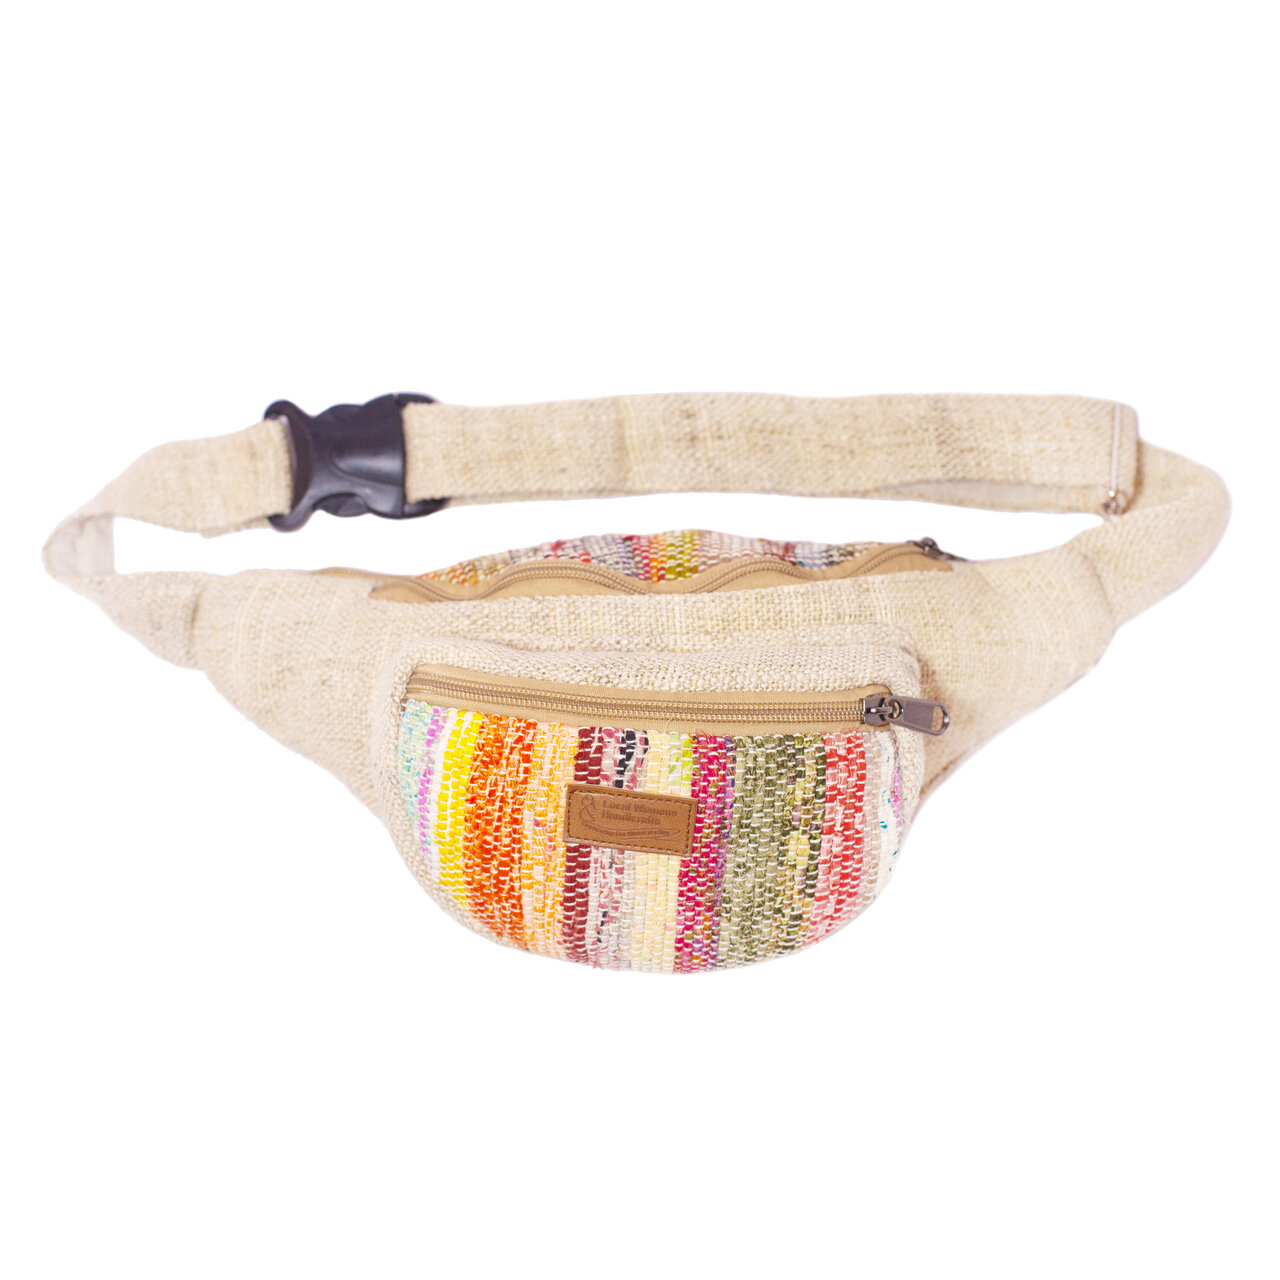 Hemp and Cotton Fanny Pack